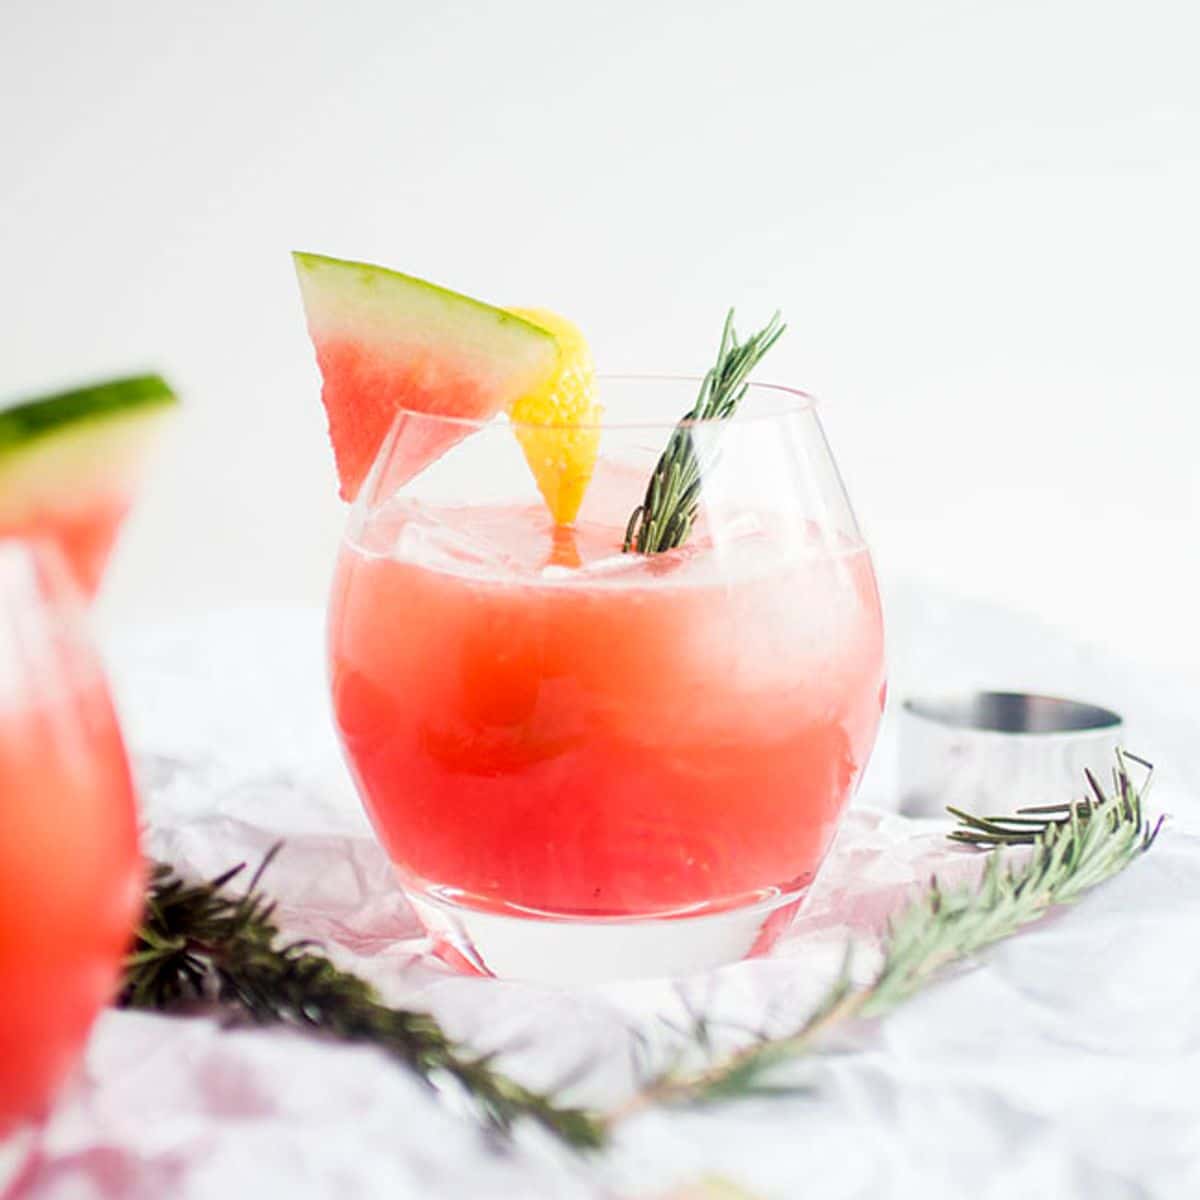 Rosemary Watermelon Cocktails